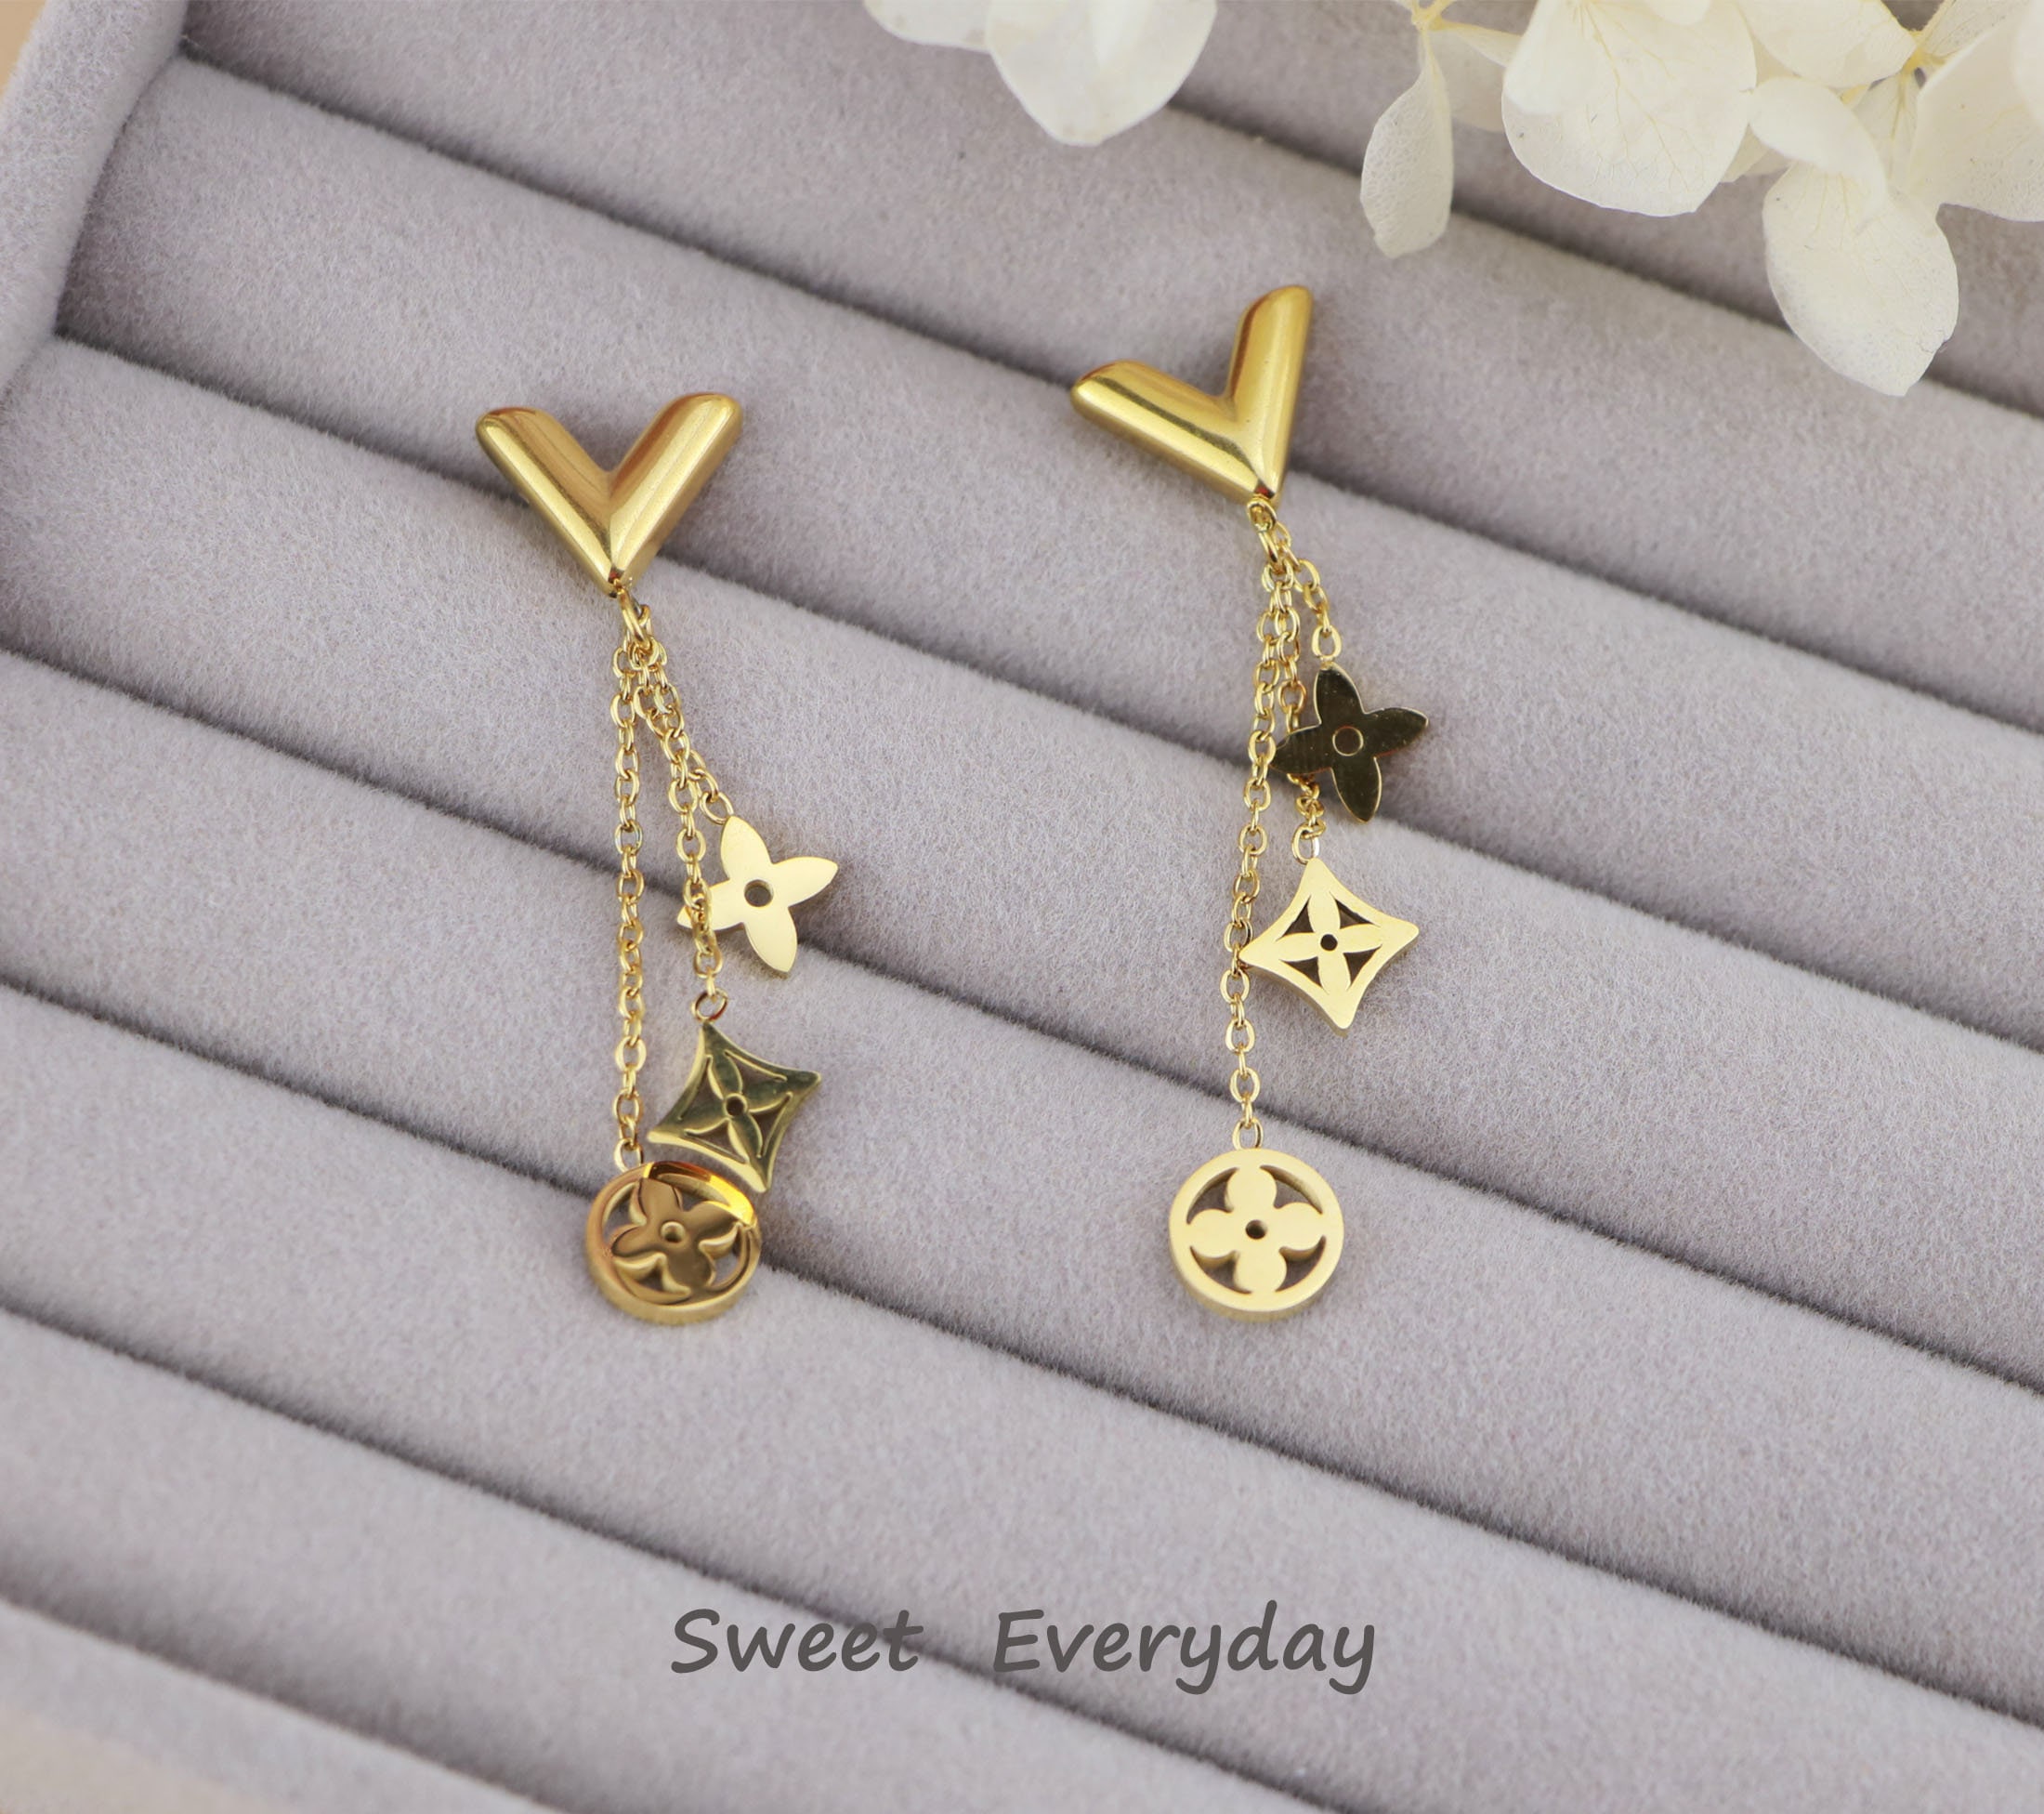 SweetEveryday 18K Gold Waterproof Clover Earrings and Necklace Set,Gold Lucky Four Leaf Clover Earrings and Bracelet,Tarnish Free Clover Jewelry Set